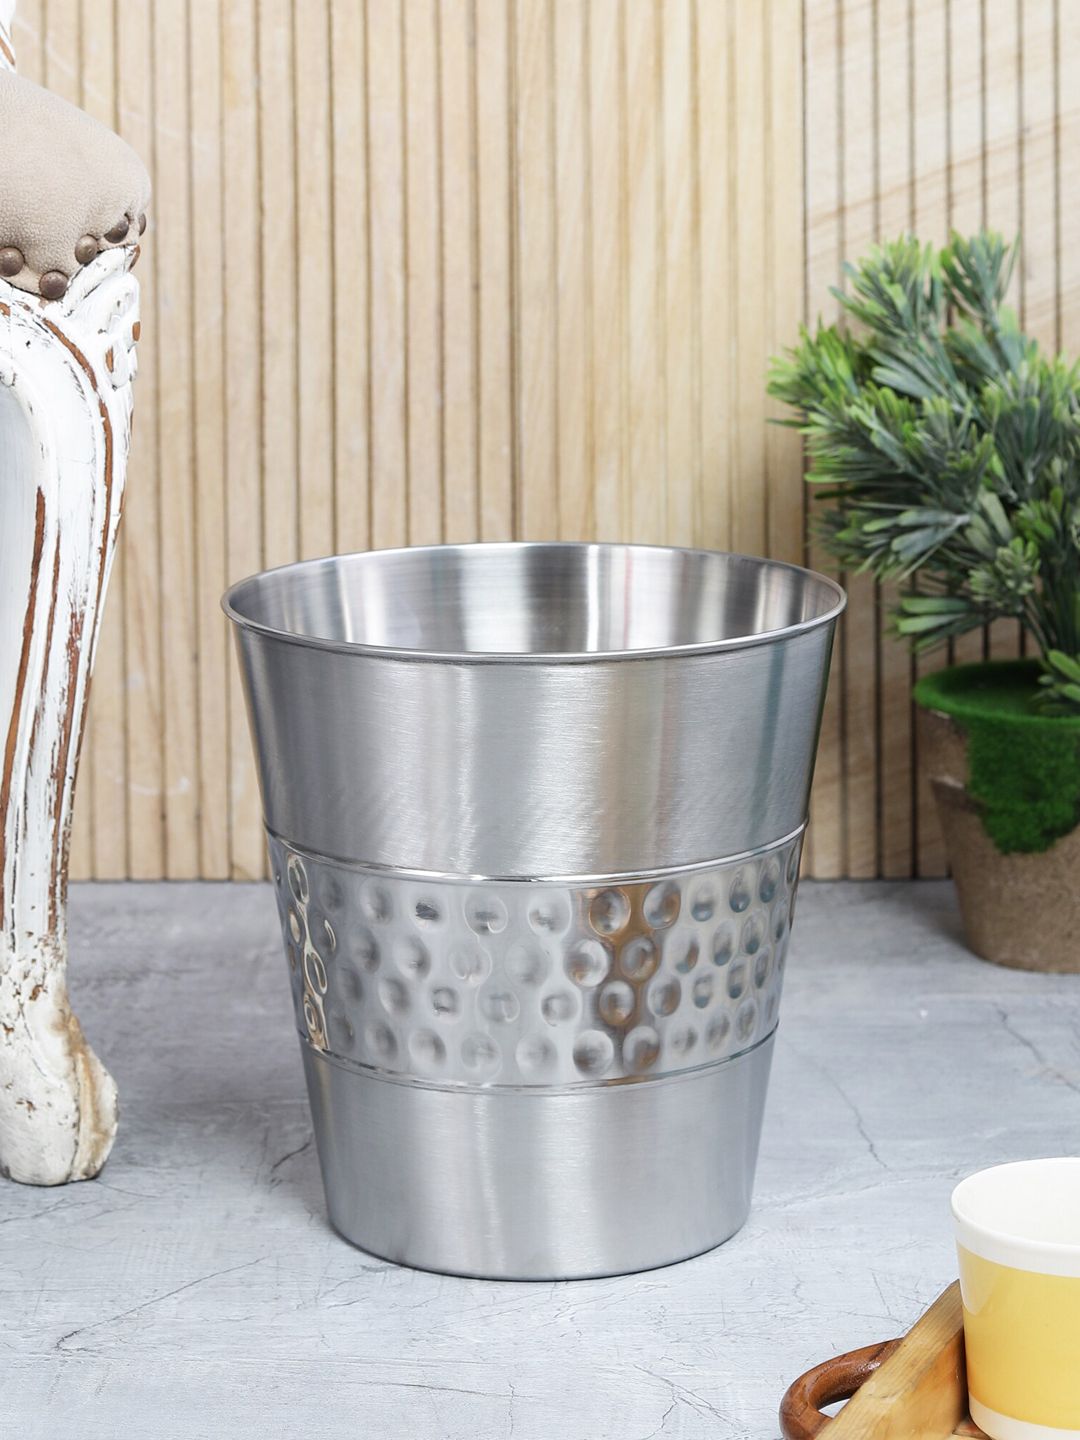 The Decor Mart Silver-Toned Hammered Textured Metal Bin Price in India